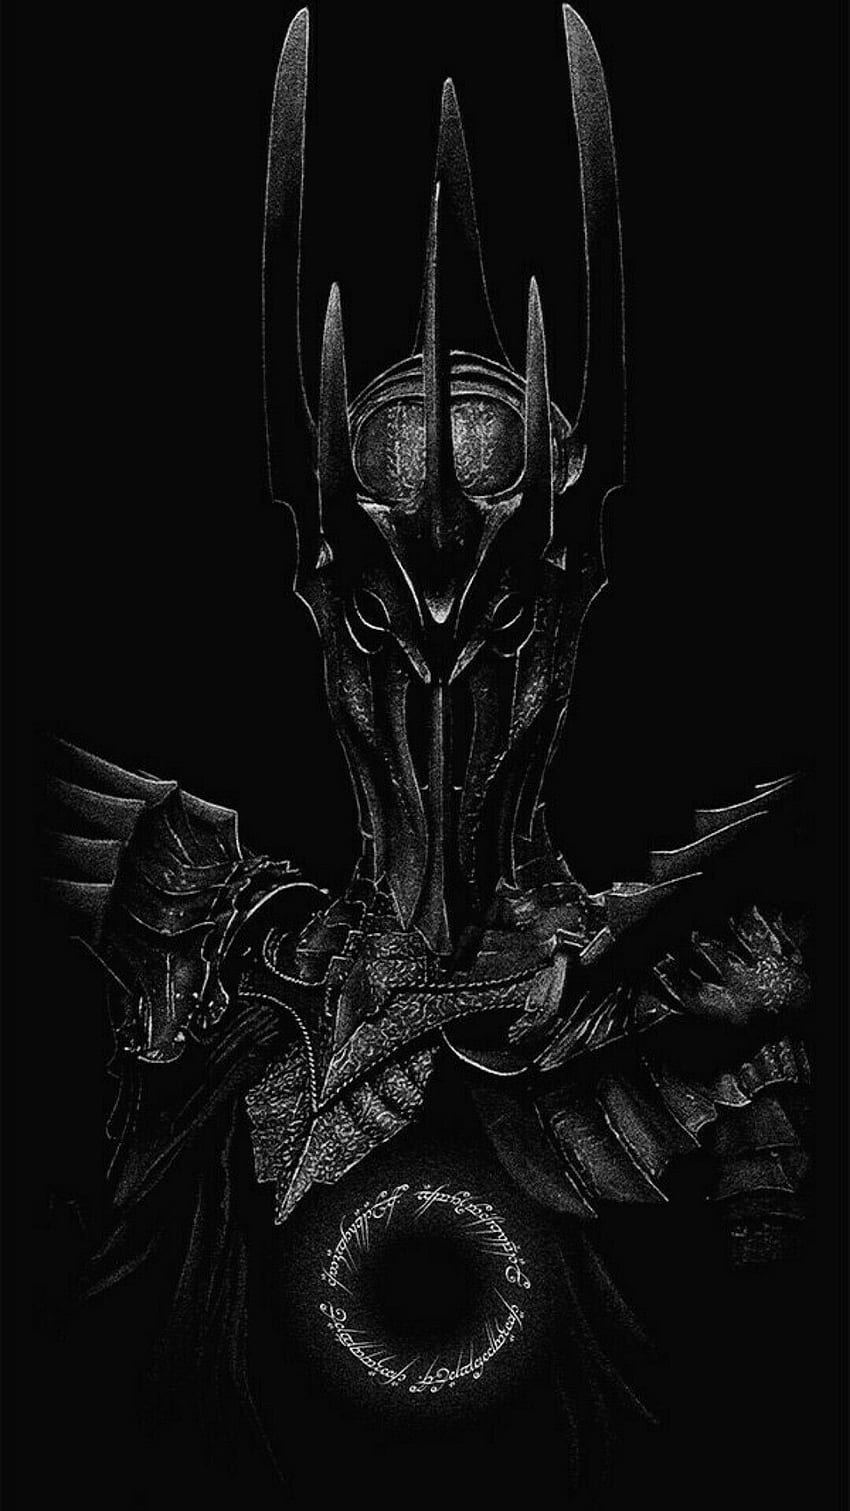 Wallpaper ID 729880  1080P of Dark lord the arts Sauron rings free  download